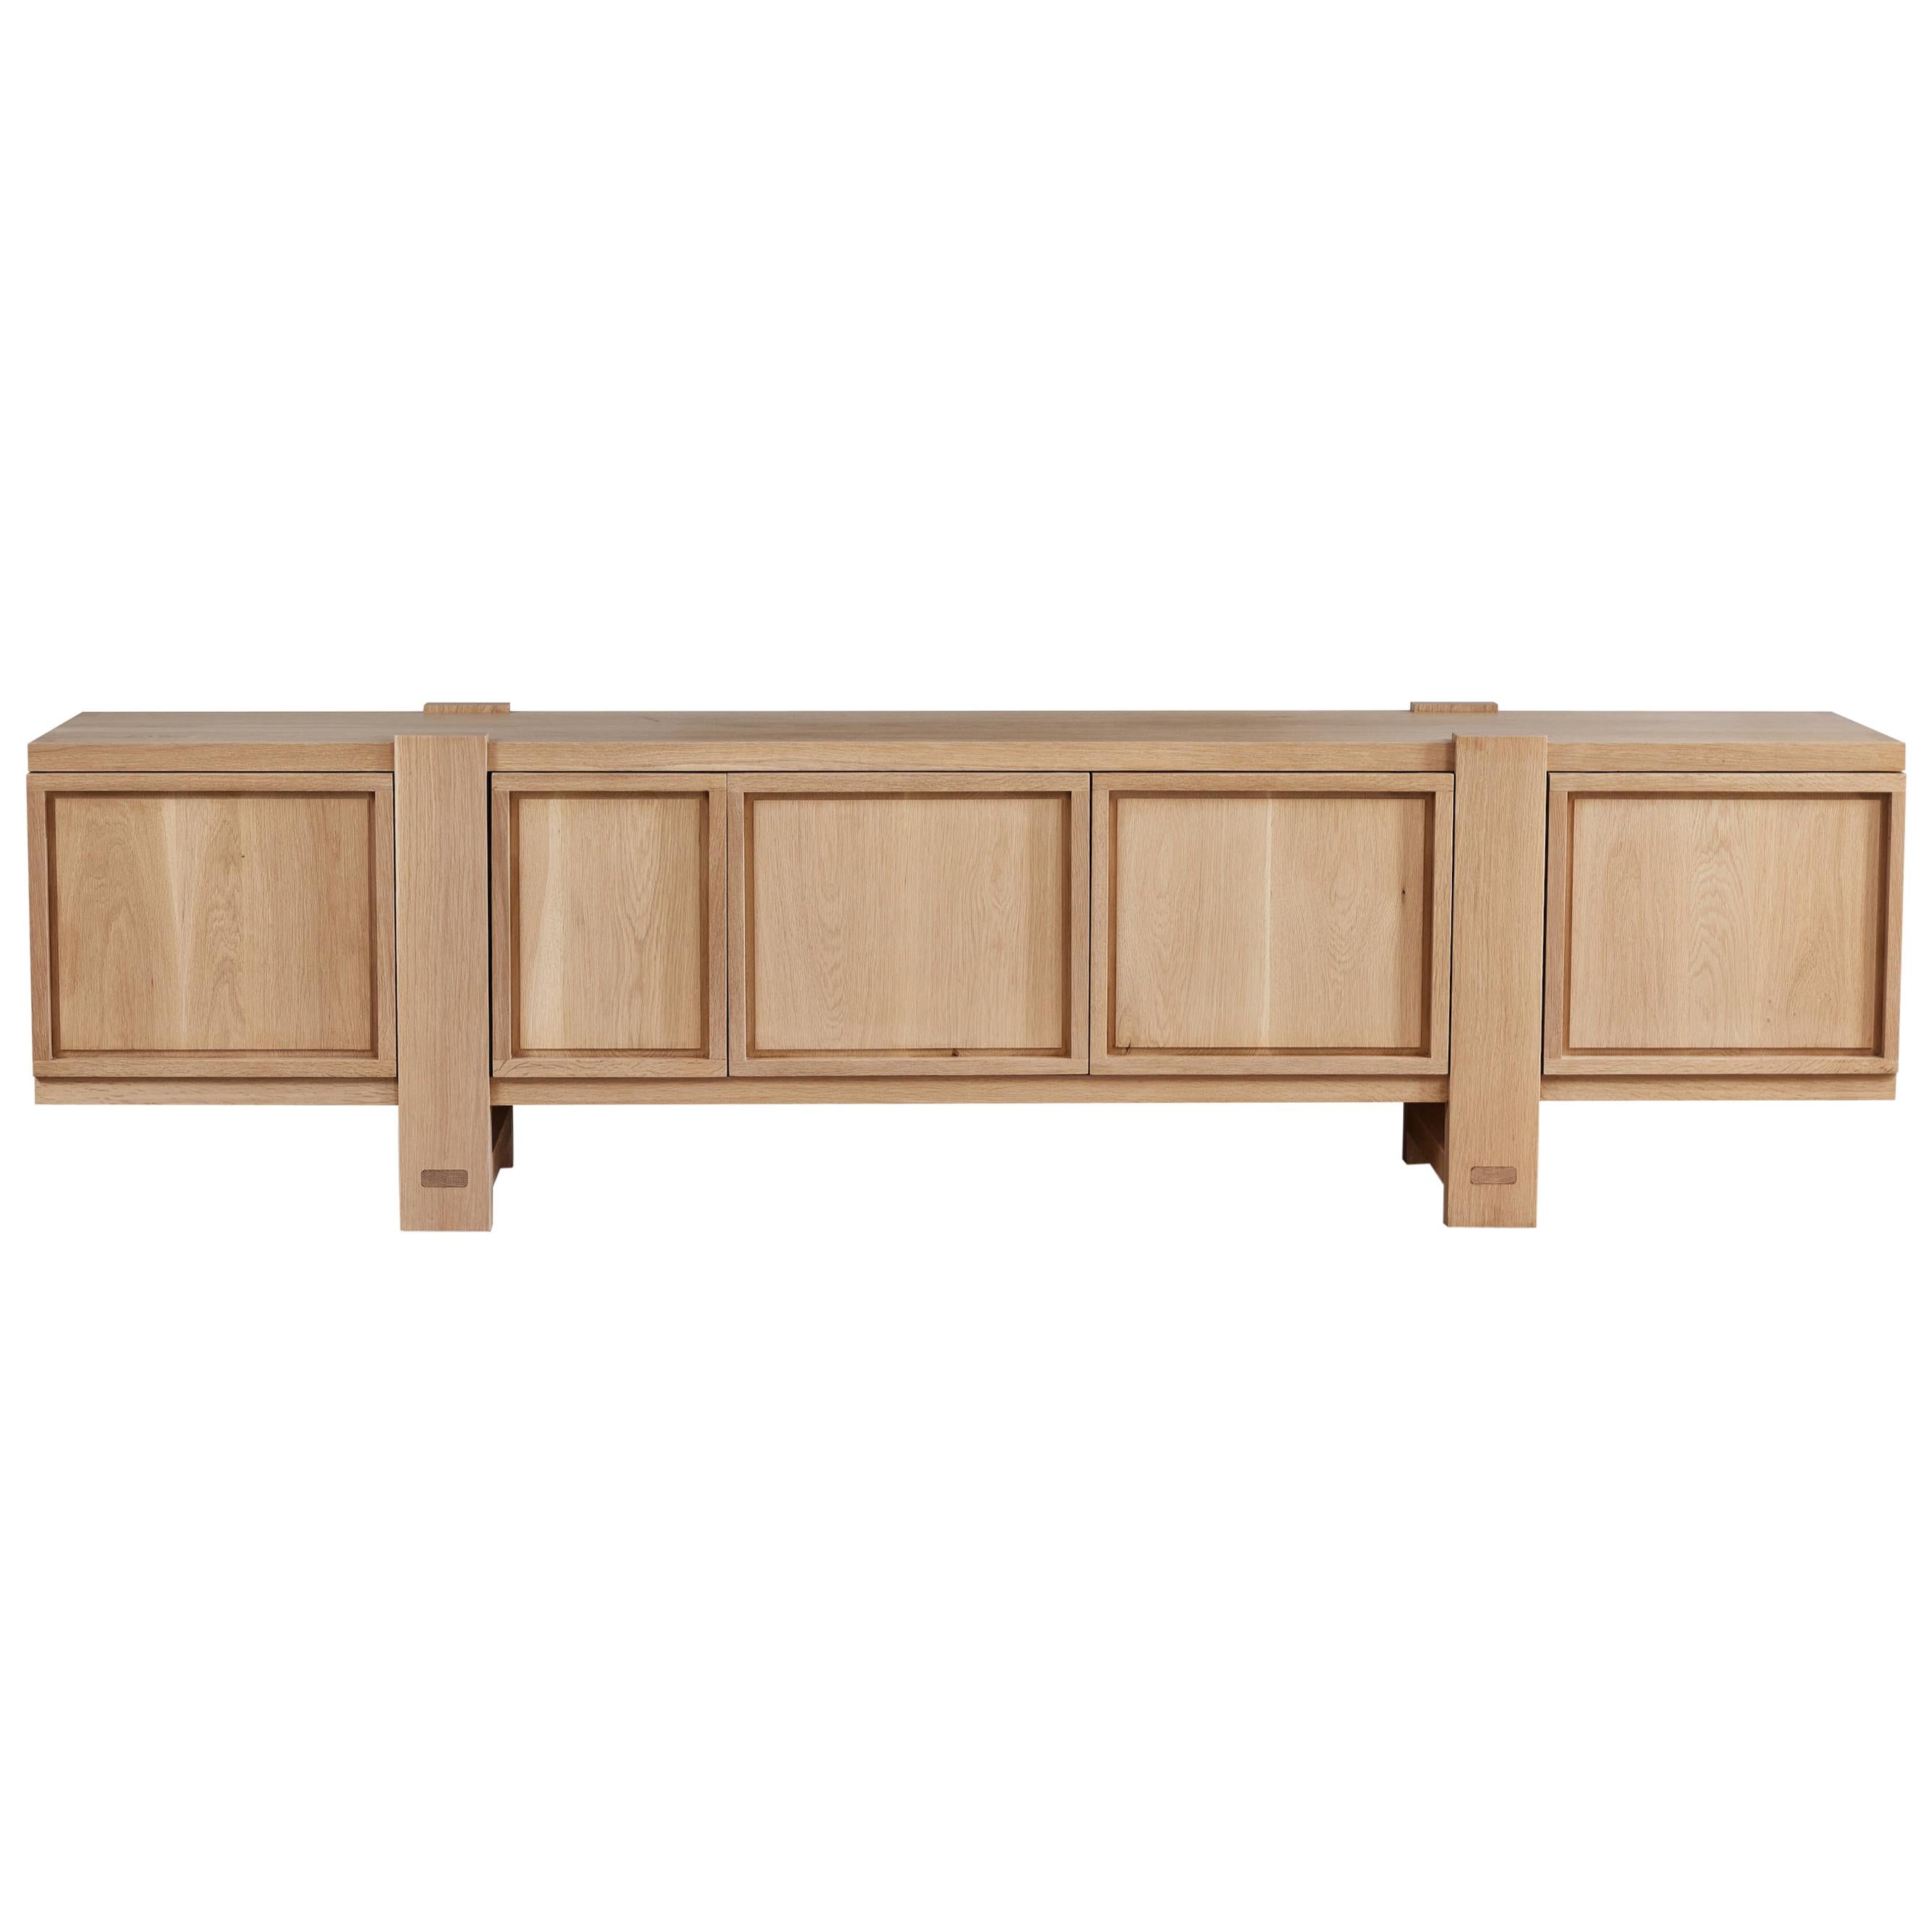 Lake Credenza in White Oak, with Interior Drawers, by August Abode